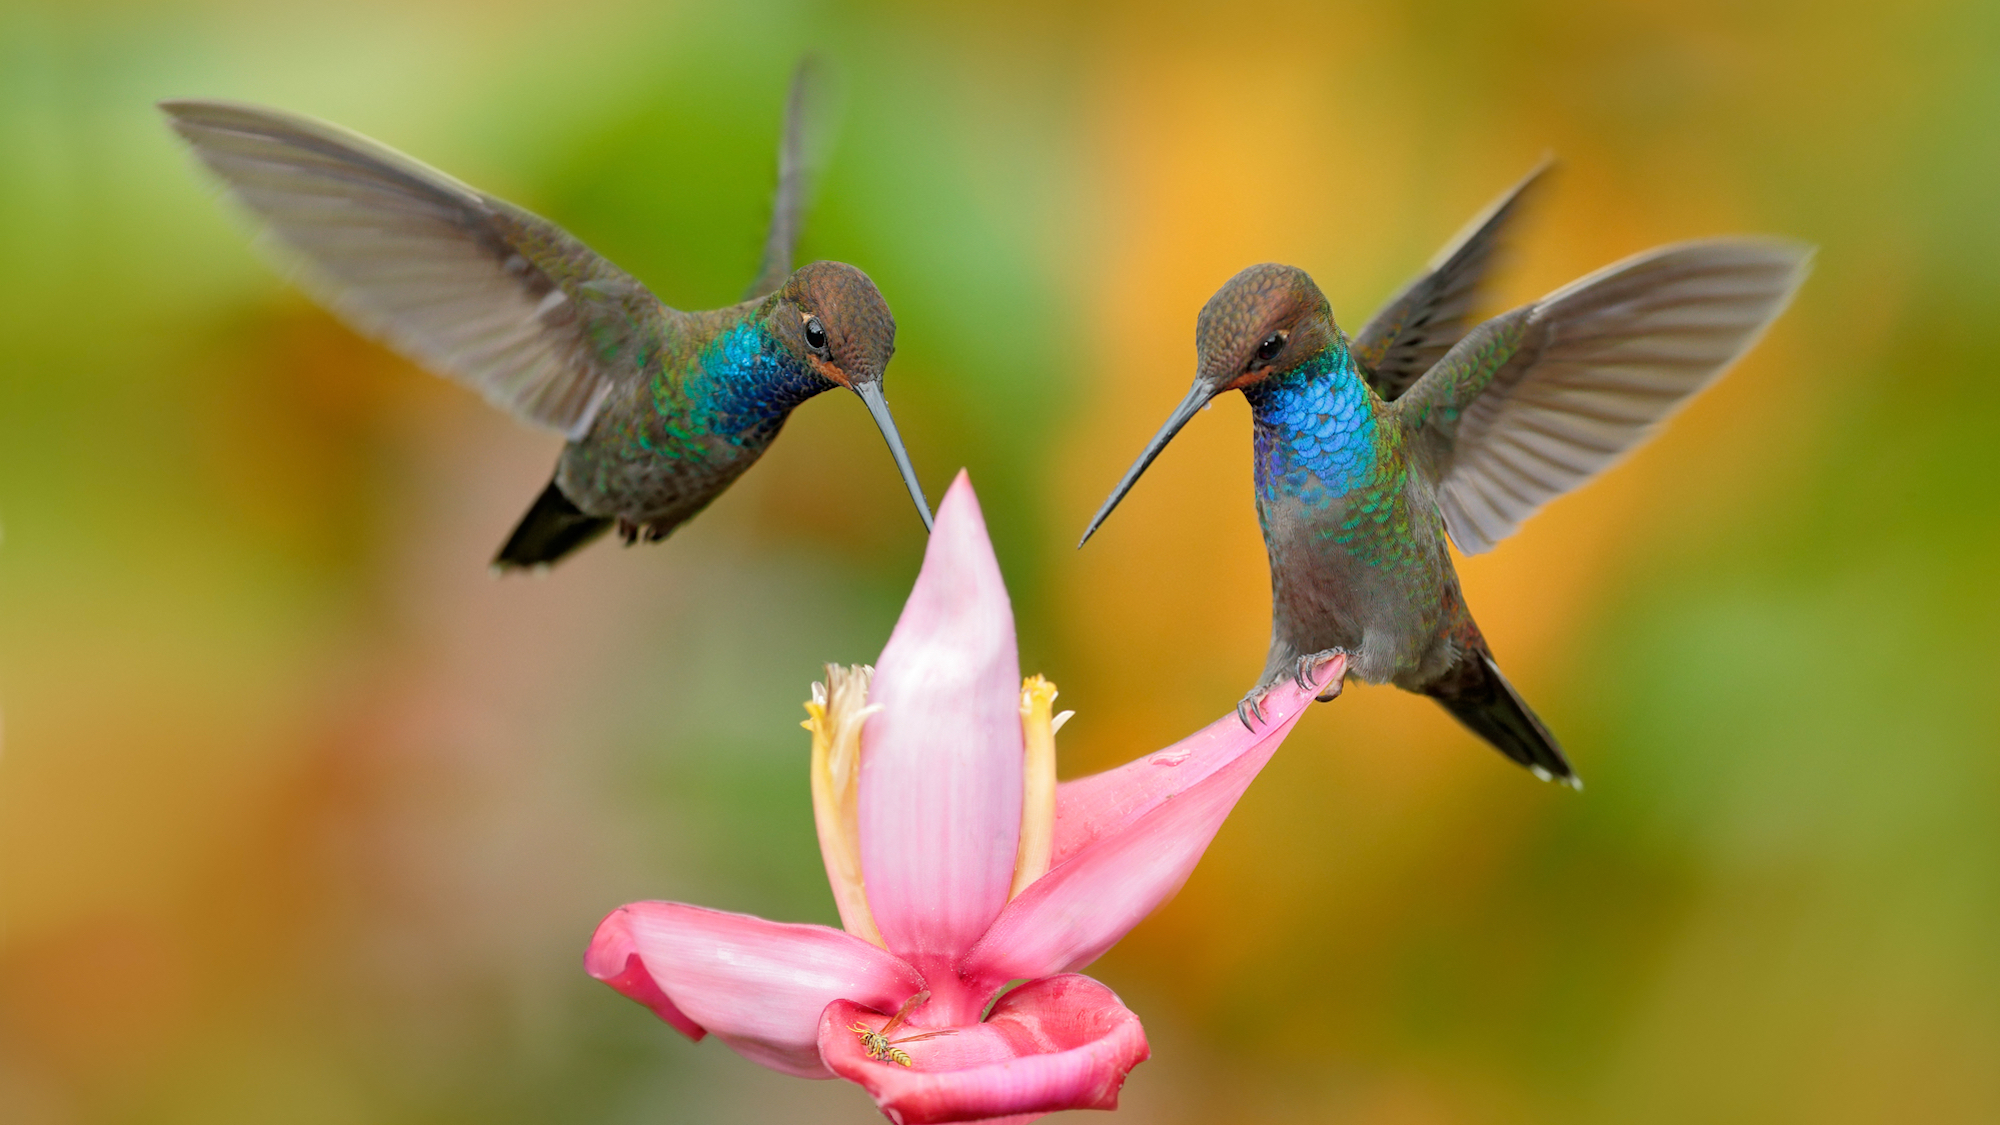 Two hummingbirds hovering above a pink flower